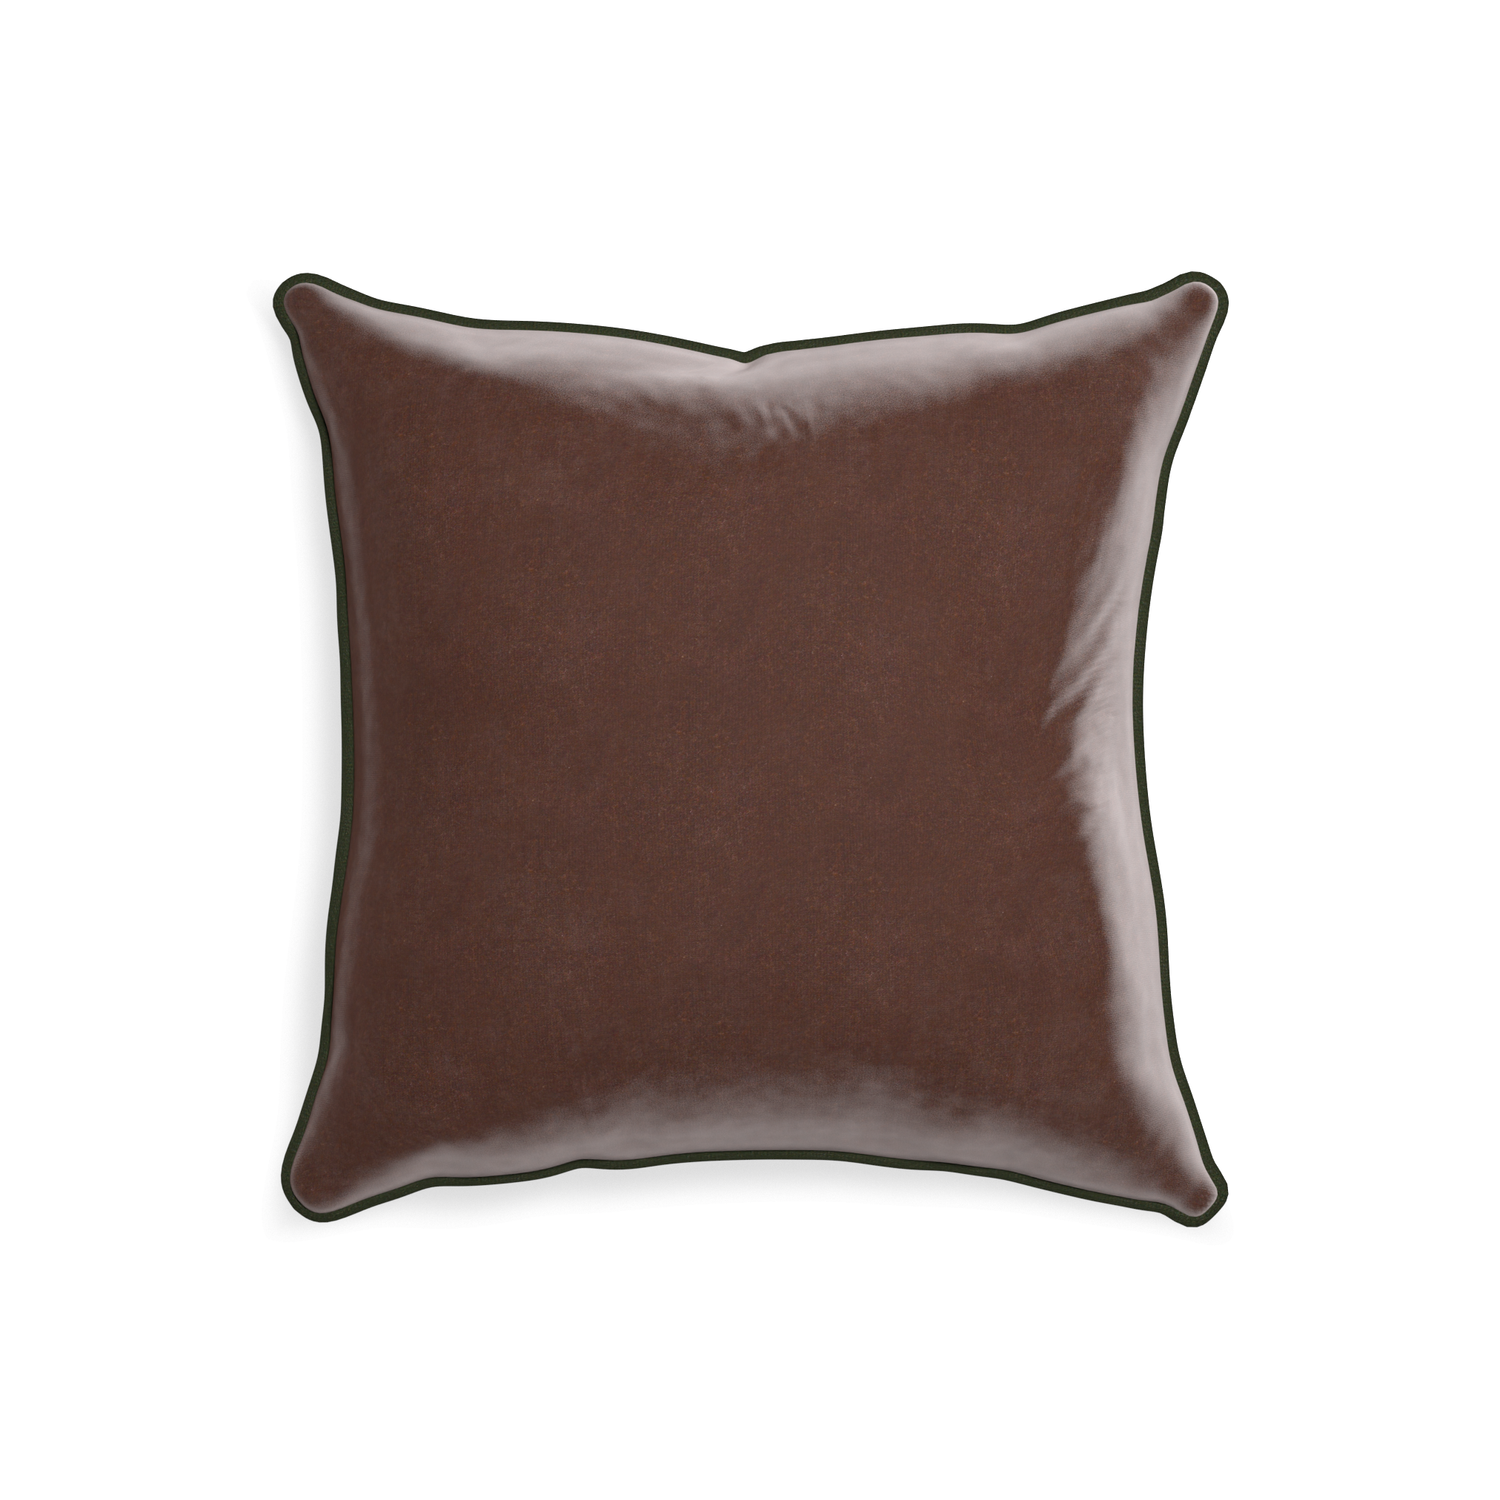 20-square walnut velvet custom pillow with f piping on white background